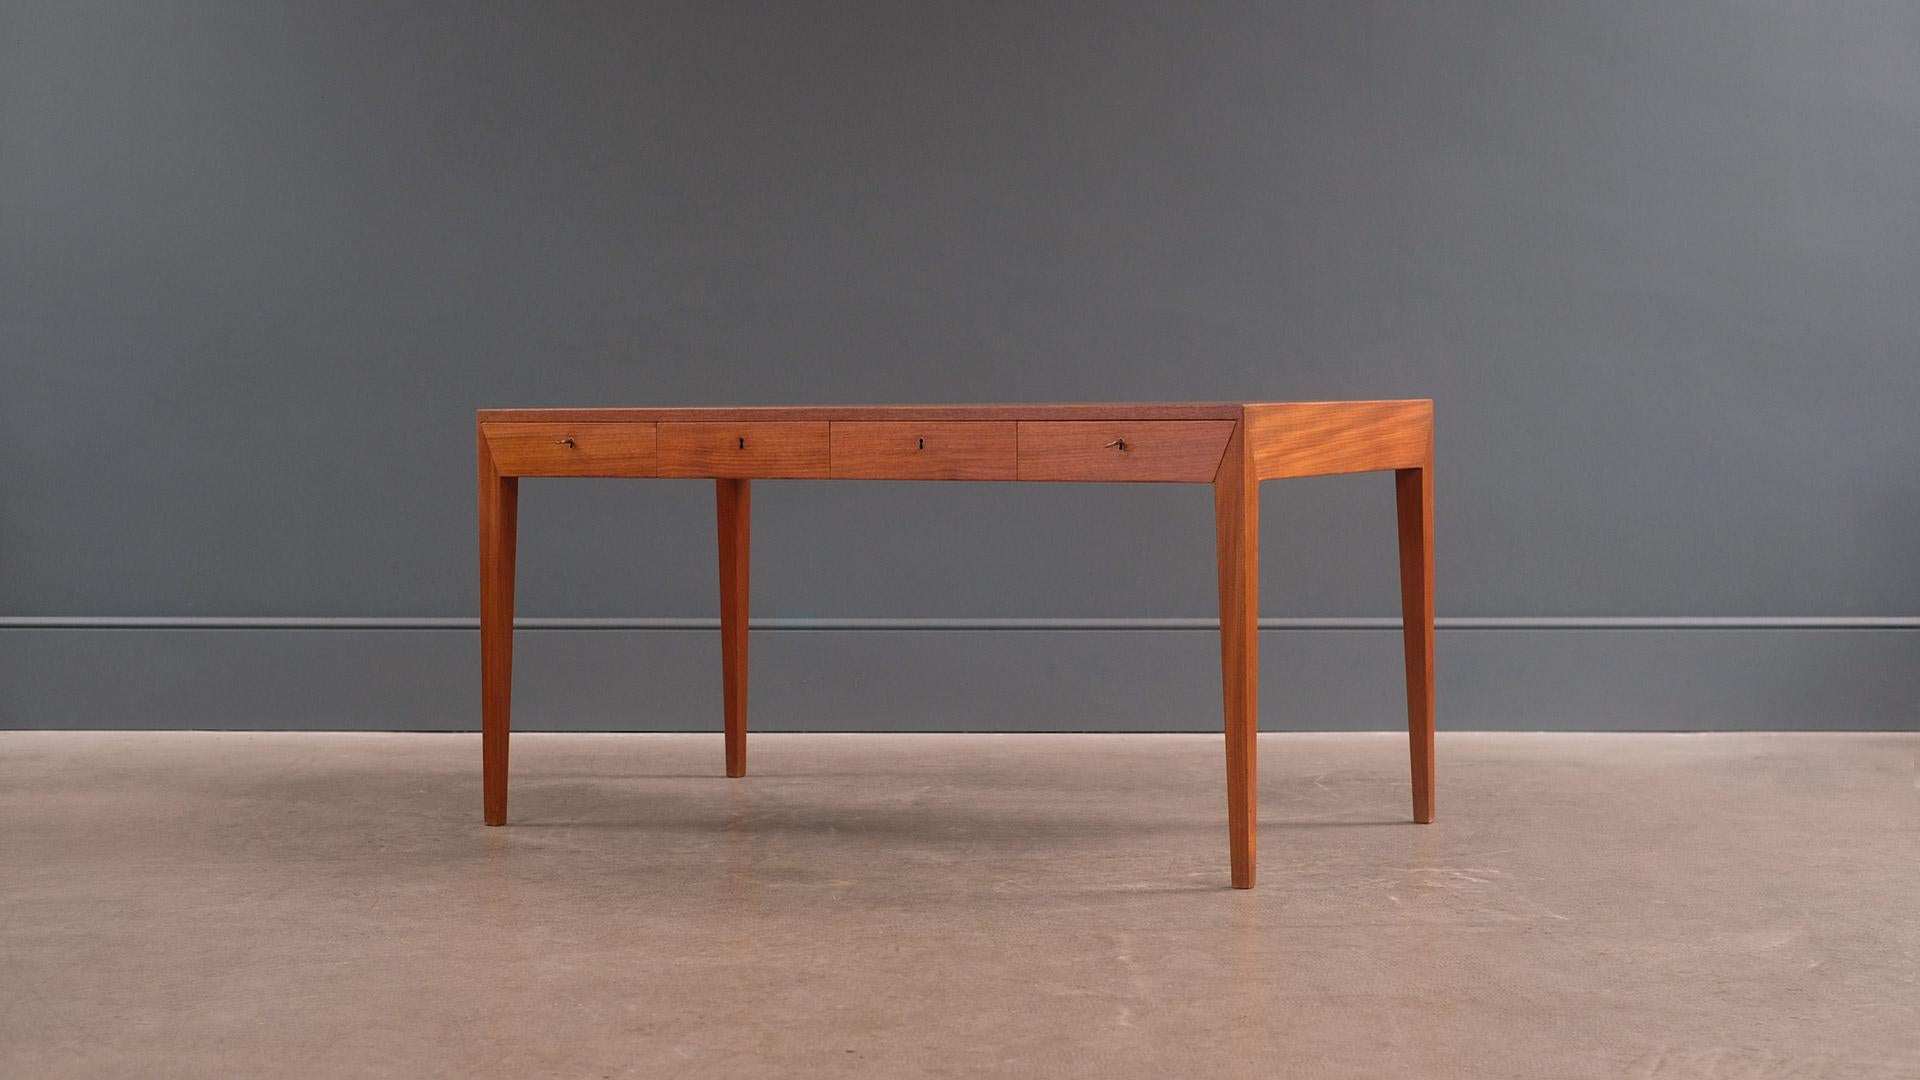 Super sought after desk designed by Severin Hansen for Haslev, Denmark. The most elegant Danish desk of the period with wonderful details. This example in rarer teak with beautiful grain. Great piece.